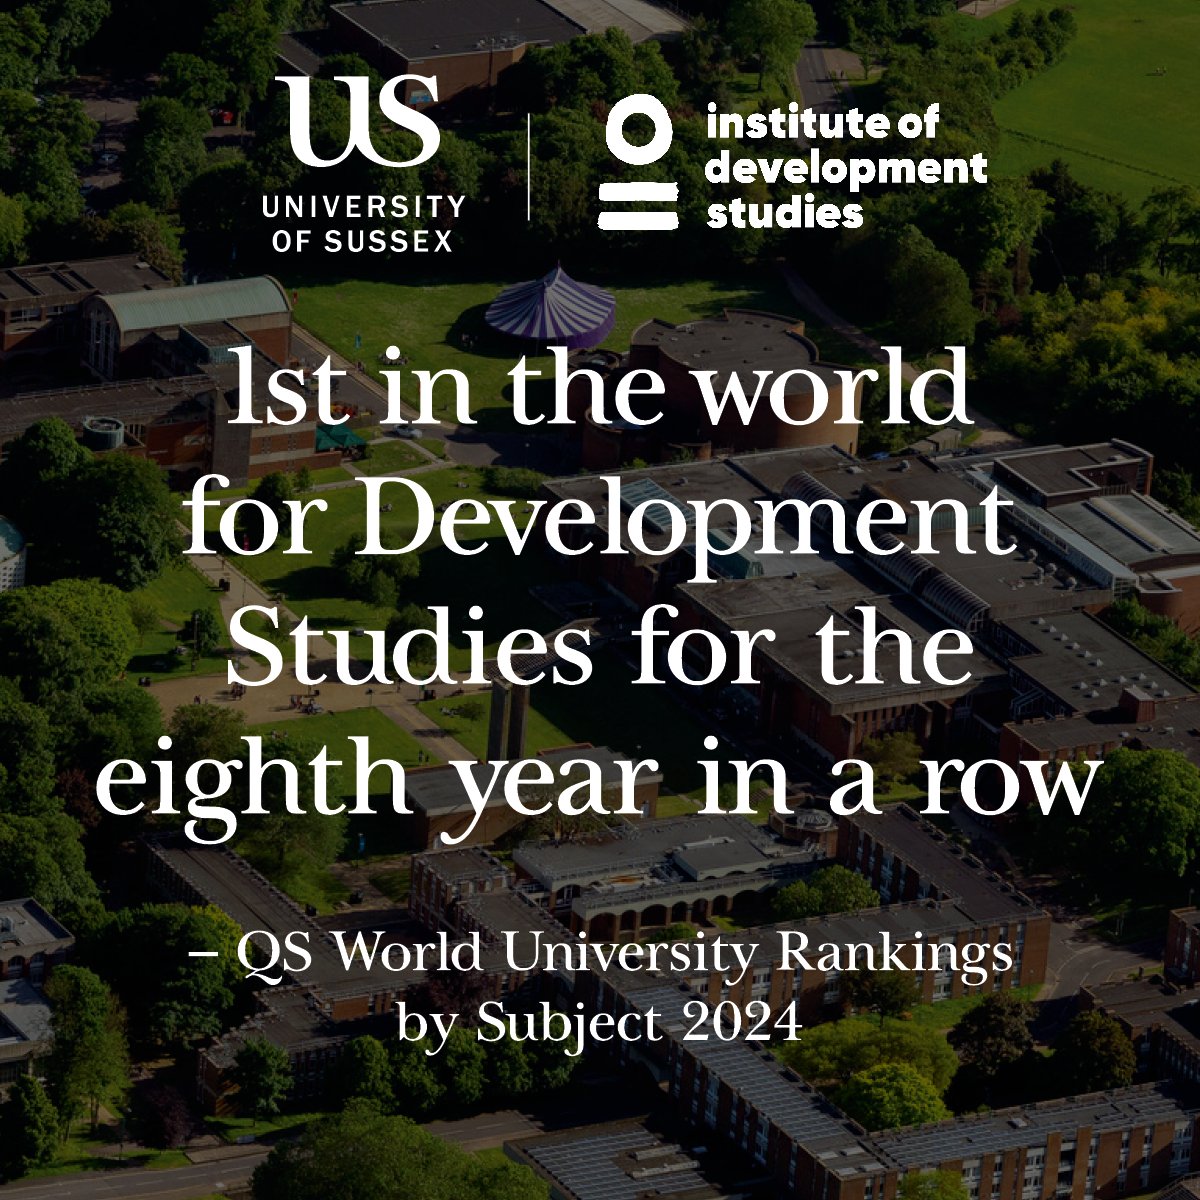 It's happened again... In partnership with @ids_uk, we've been ranked 1st in the world for Development Studies for the 8th year in a row in the @worlduniranking by Subject 2024! 🌎 Congratulations to everyone involved! @SussexGlobal @SussexUBusiness @SussexUniMAH @SussexUniESW